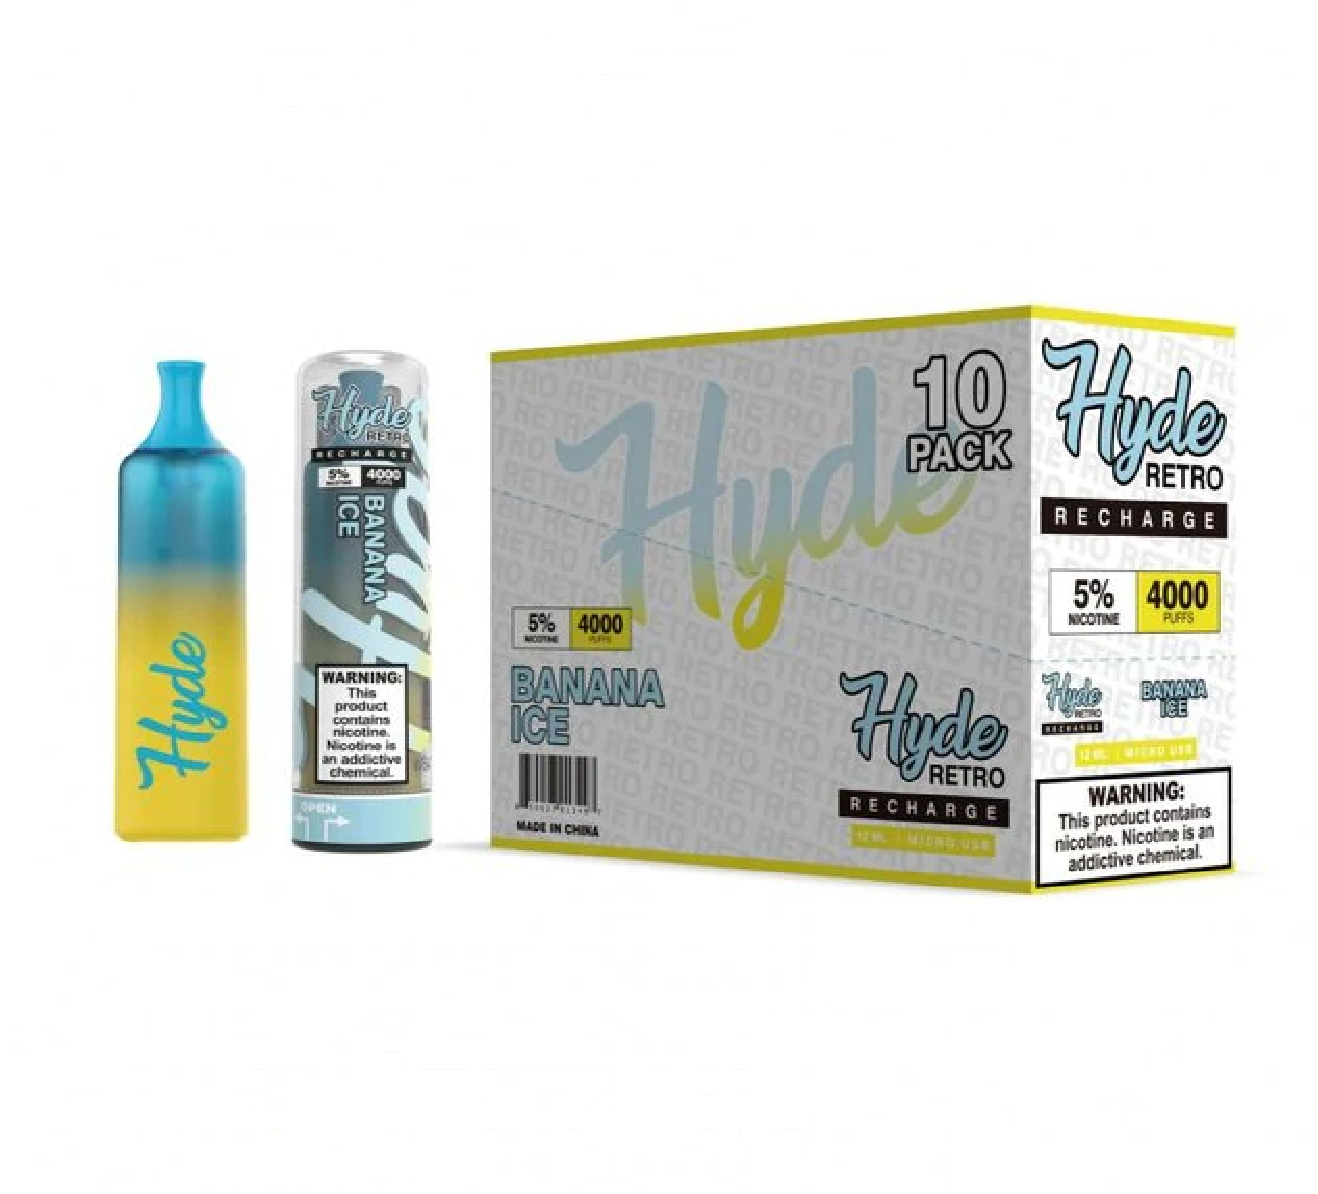 Hyde Retro Recharge 4000 Puffs